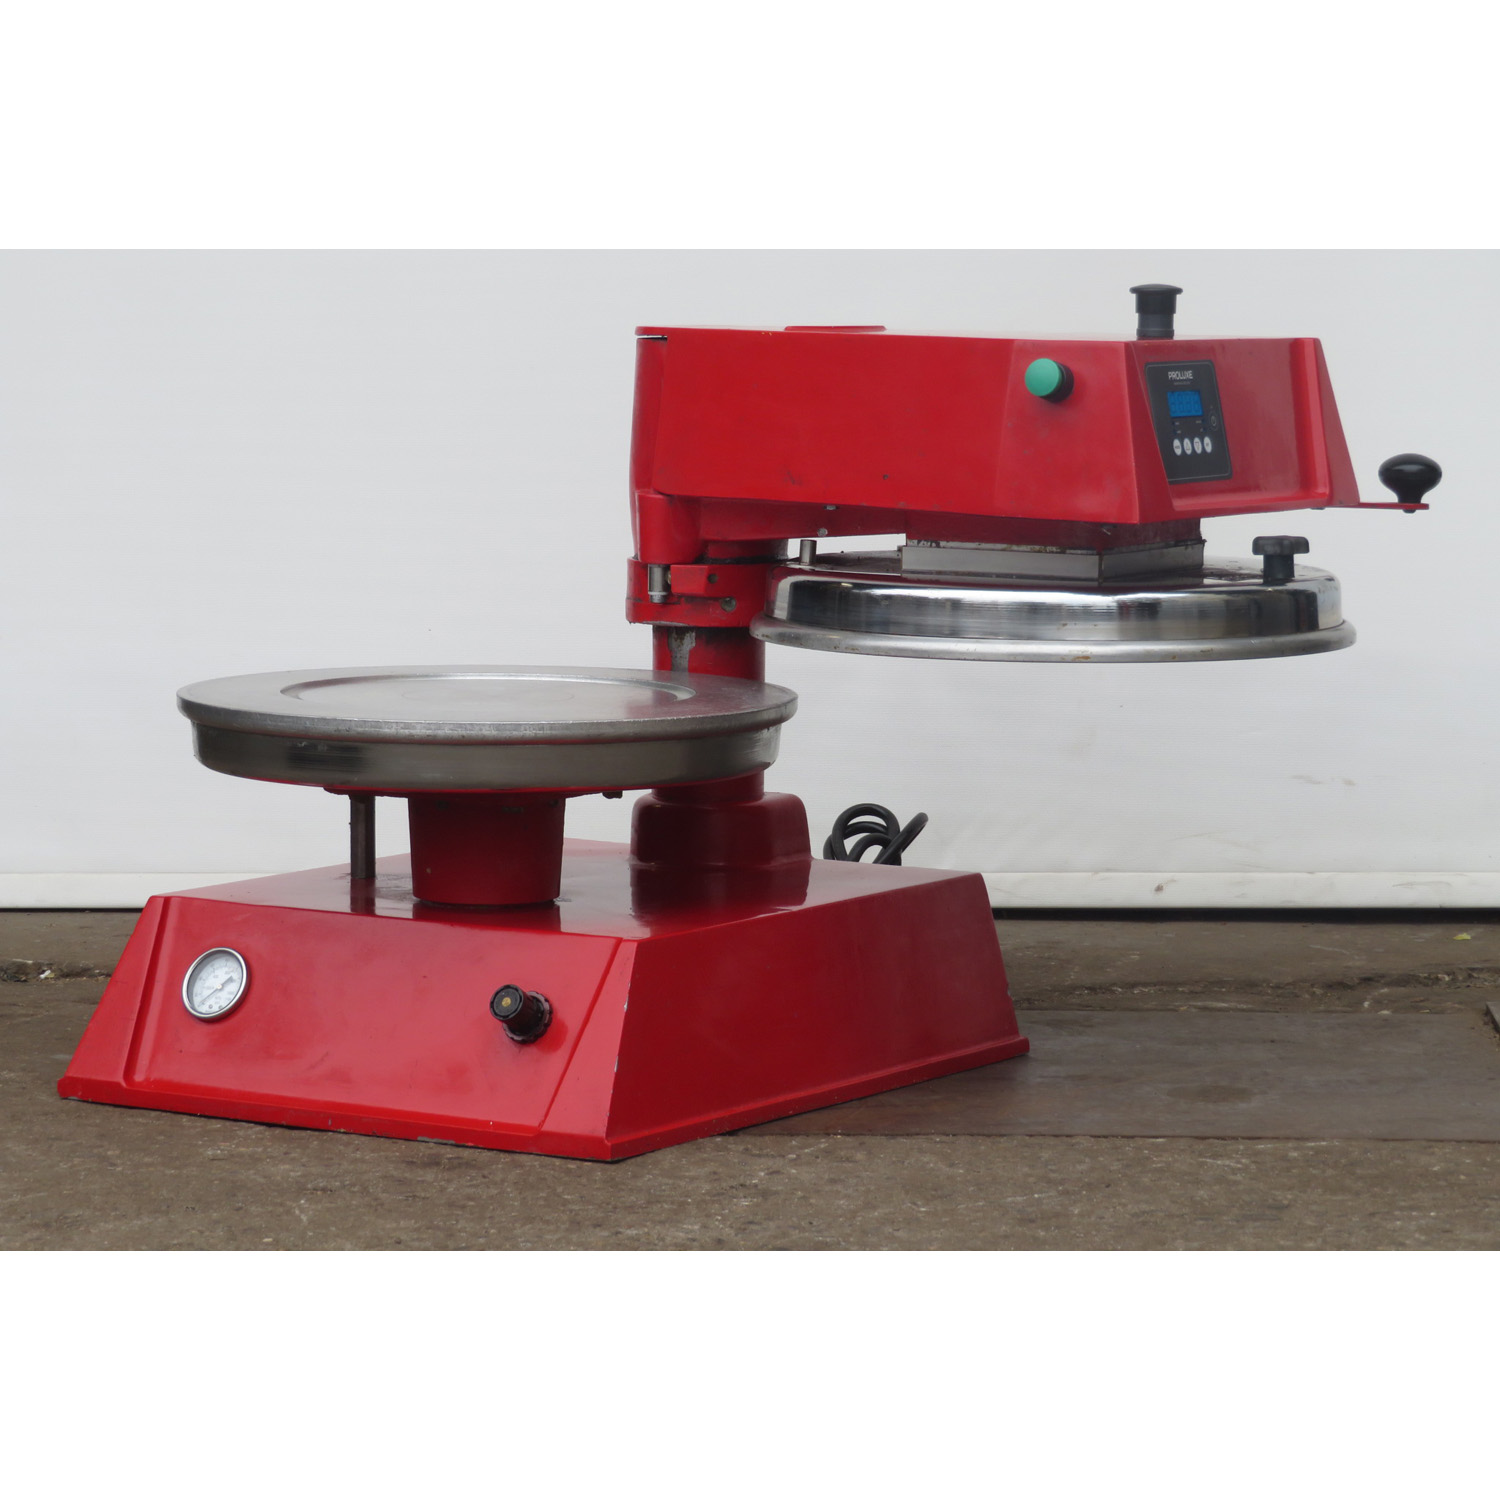 Proluxe DP2300 Semi-Automatic 12" Pizza Press, Used Great Condition image 1